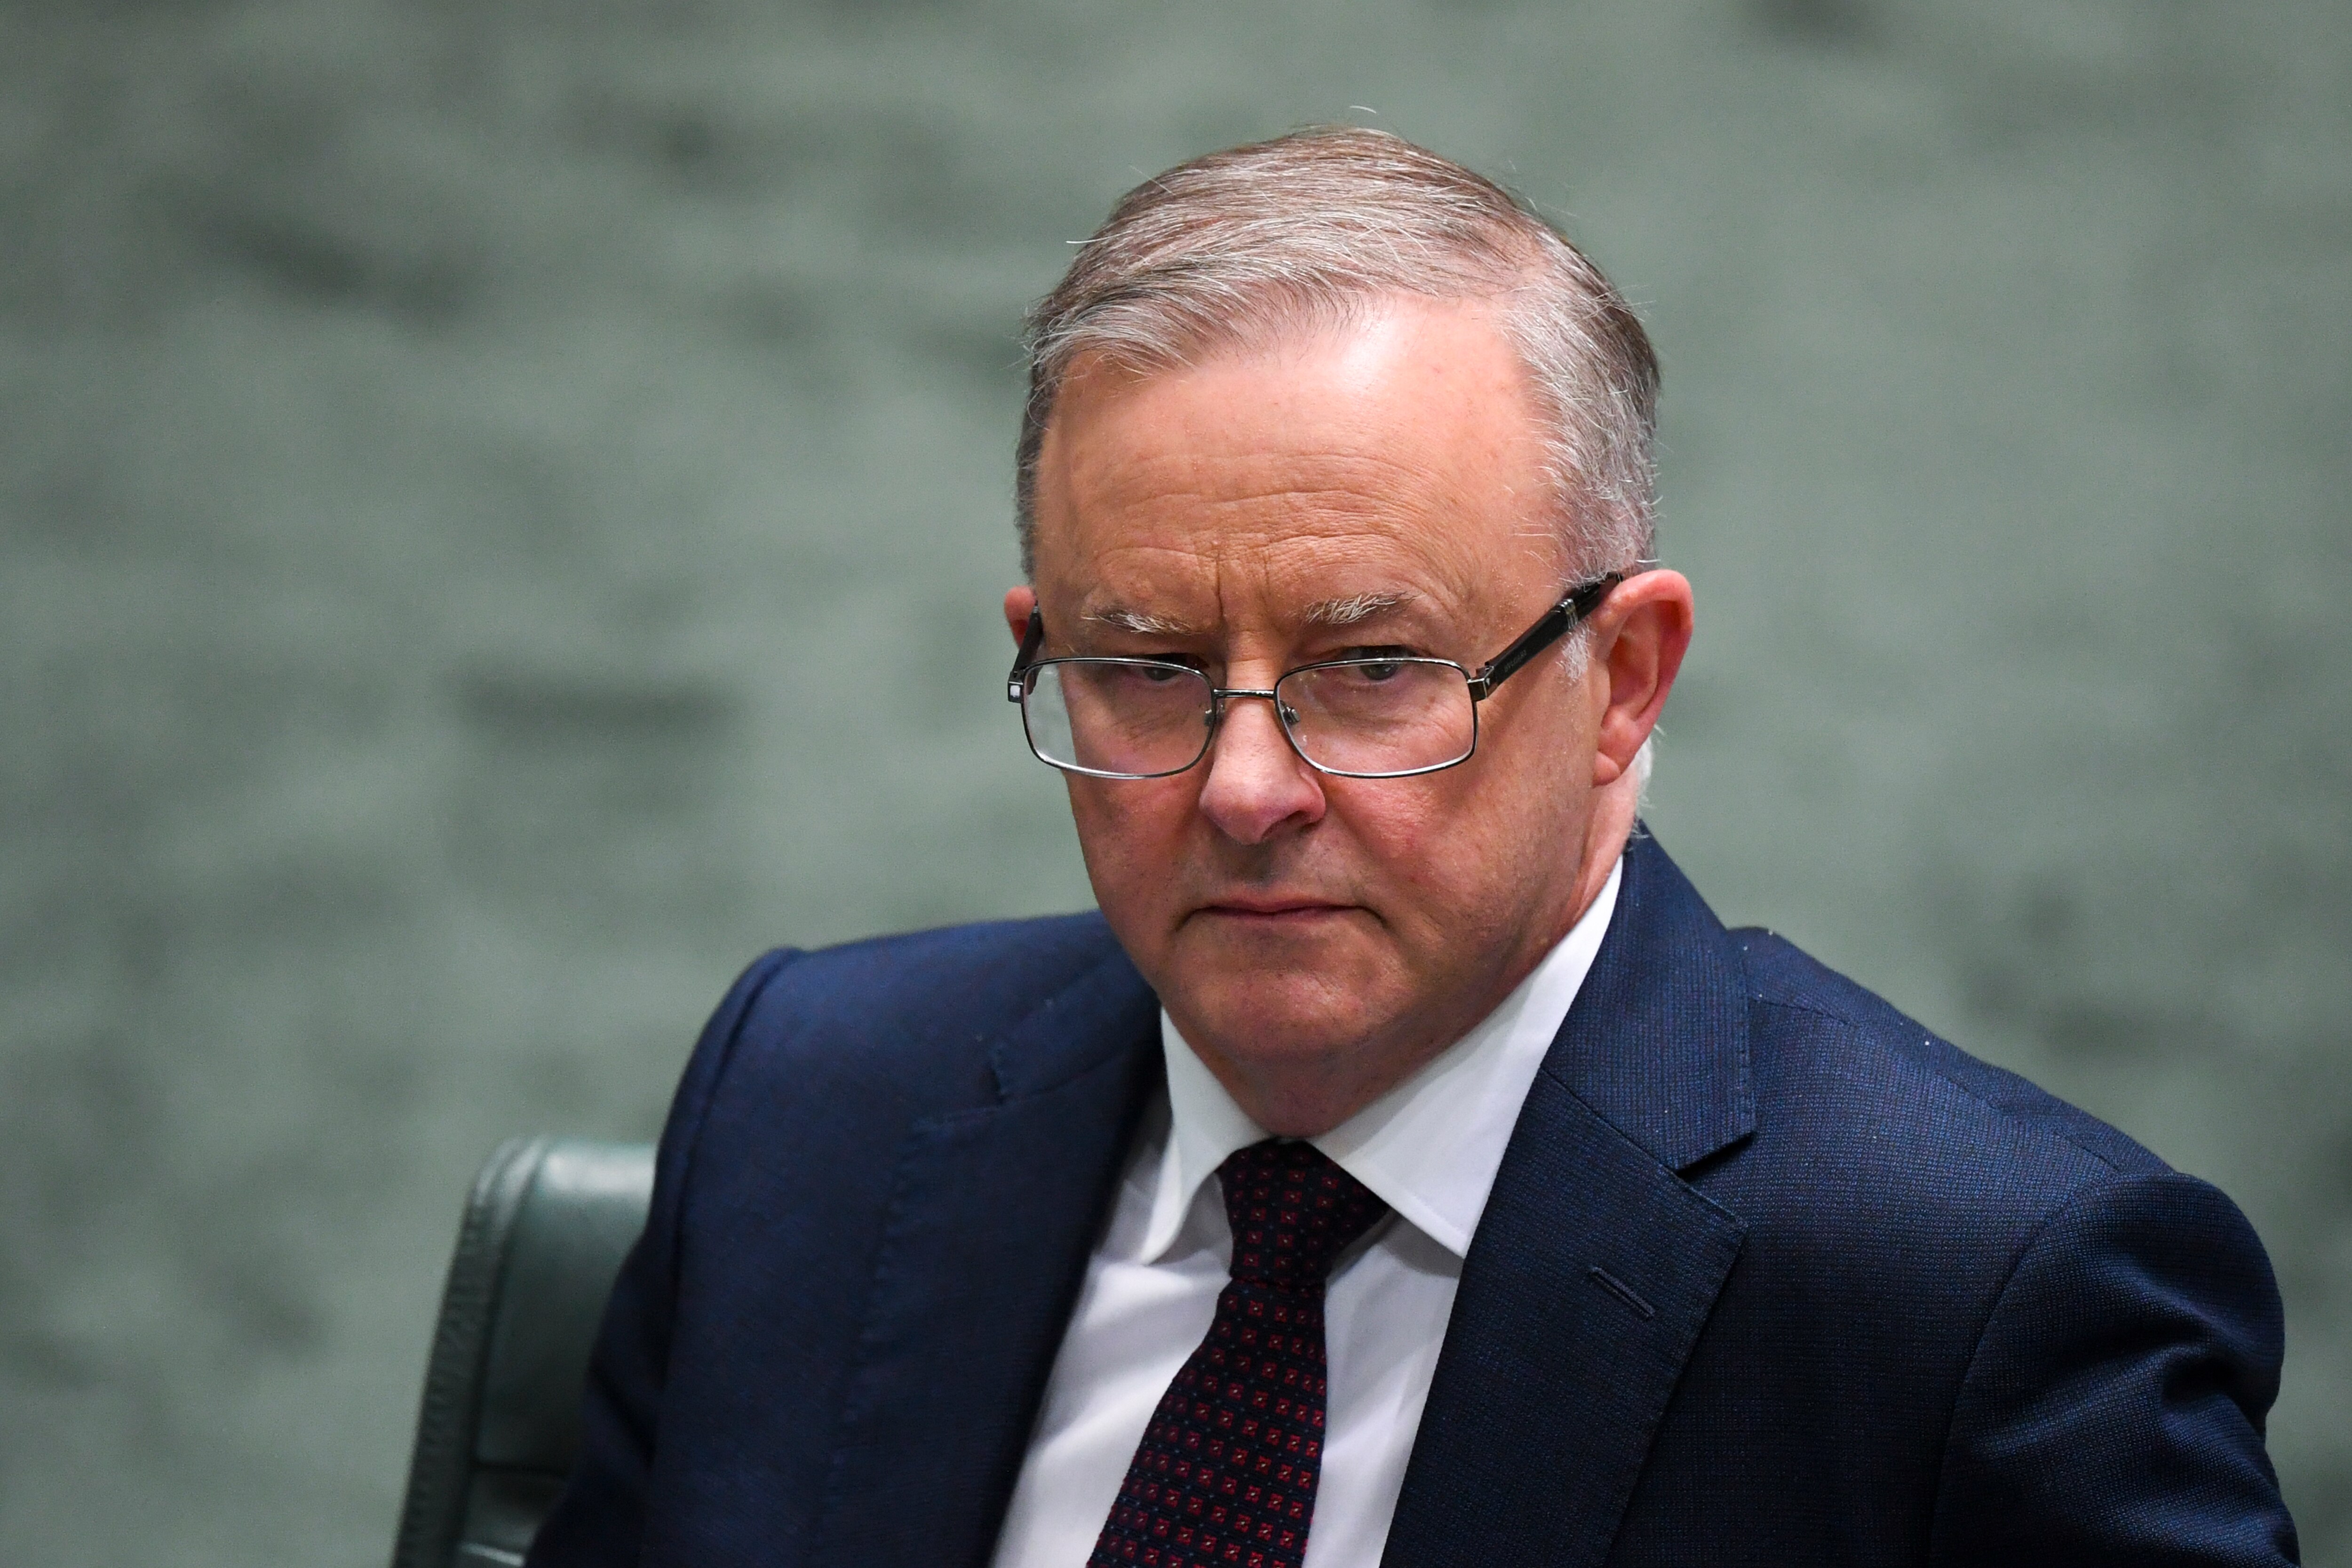 Opposition Leader Anthony Albanese reacts during House of Representatives Question Time at Parliament House in Canberra.